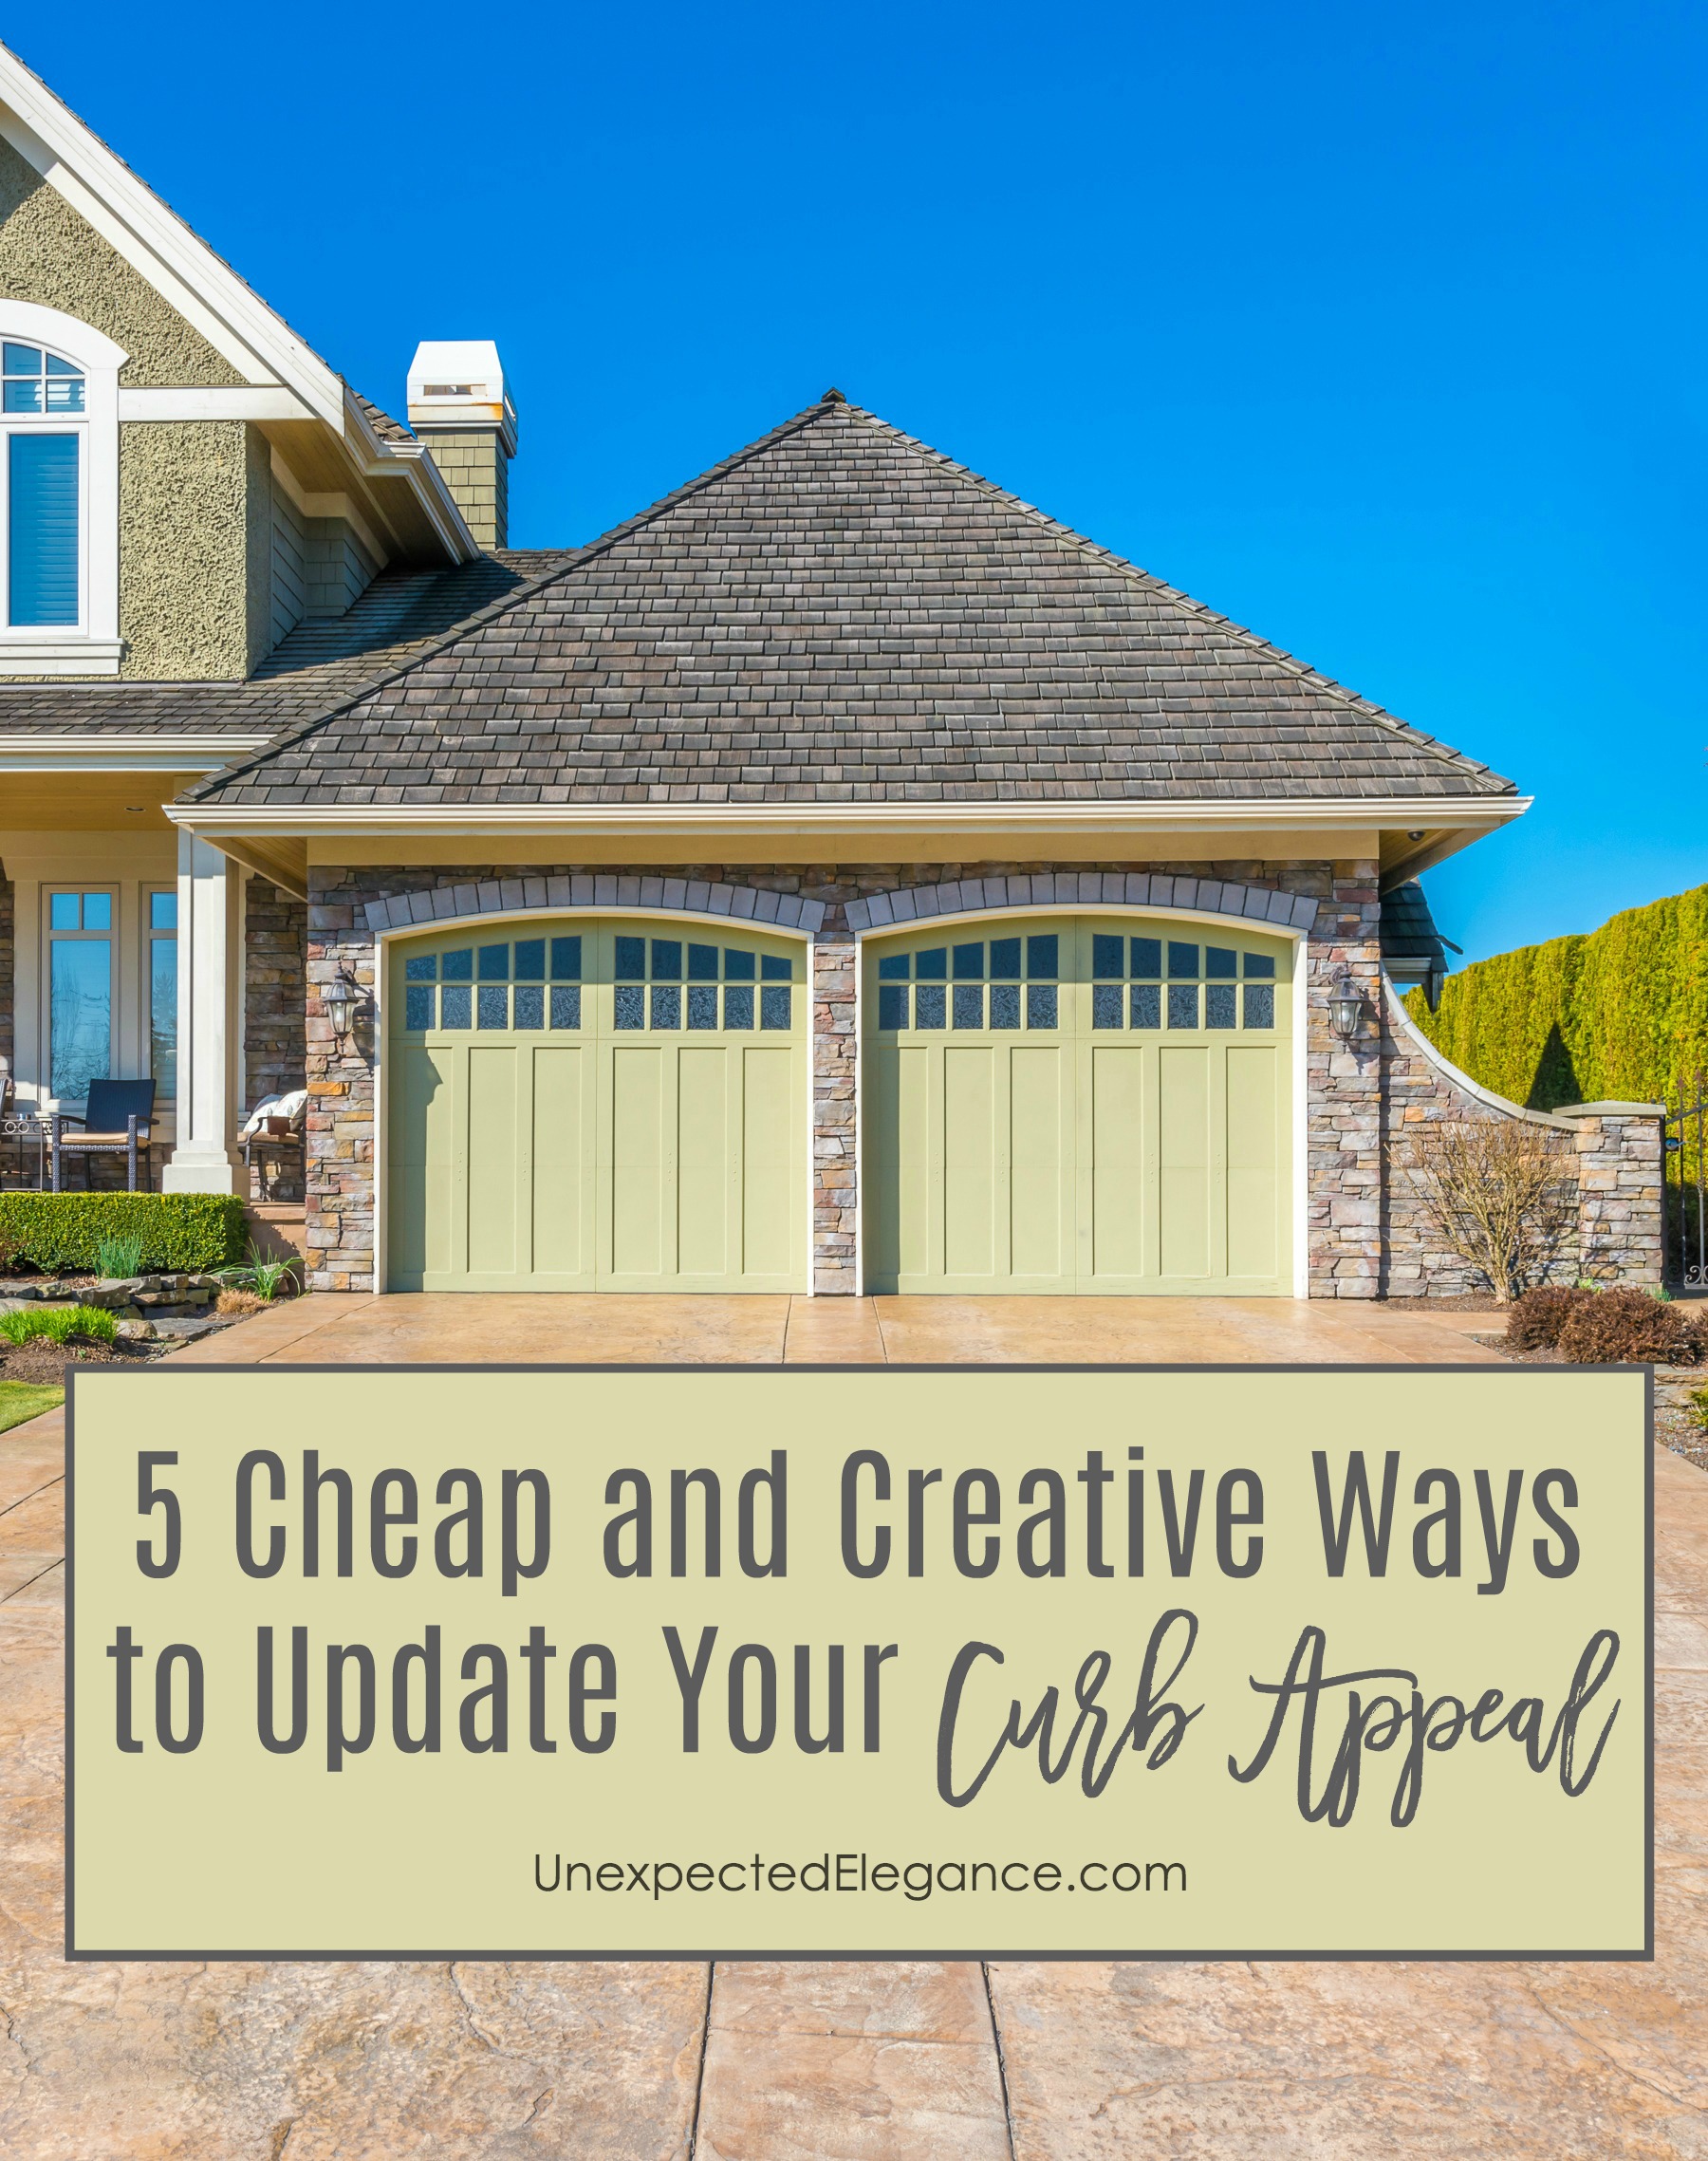  Is your home's curb appeal lacking? If the outside of your house needs a facelift, check out these creative and cheap ways to update curb appeal!